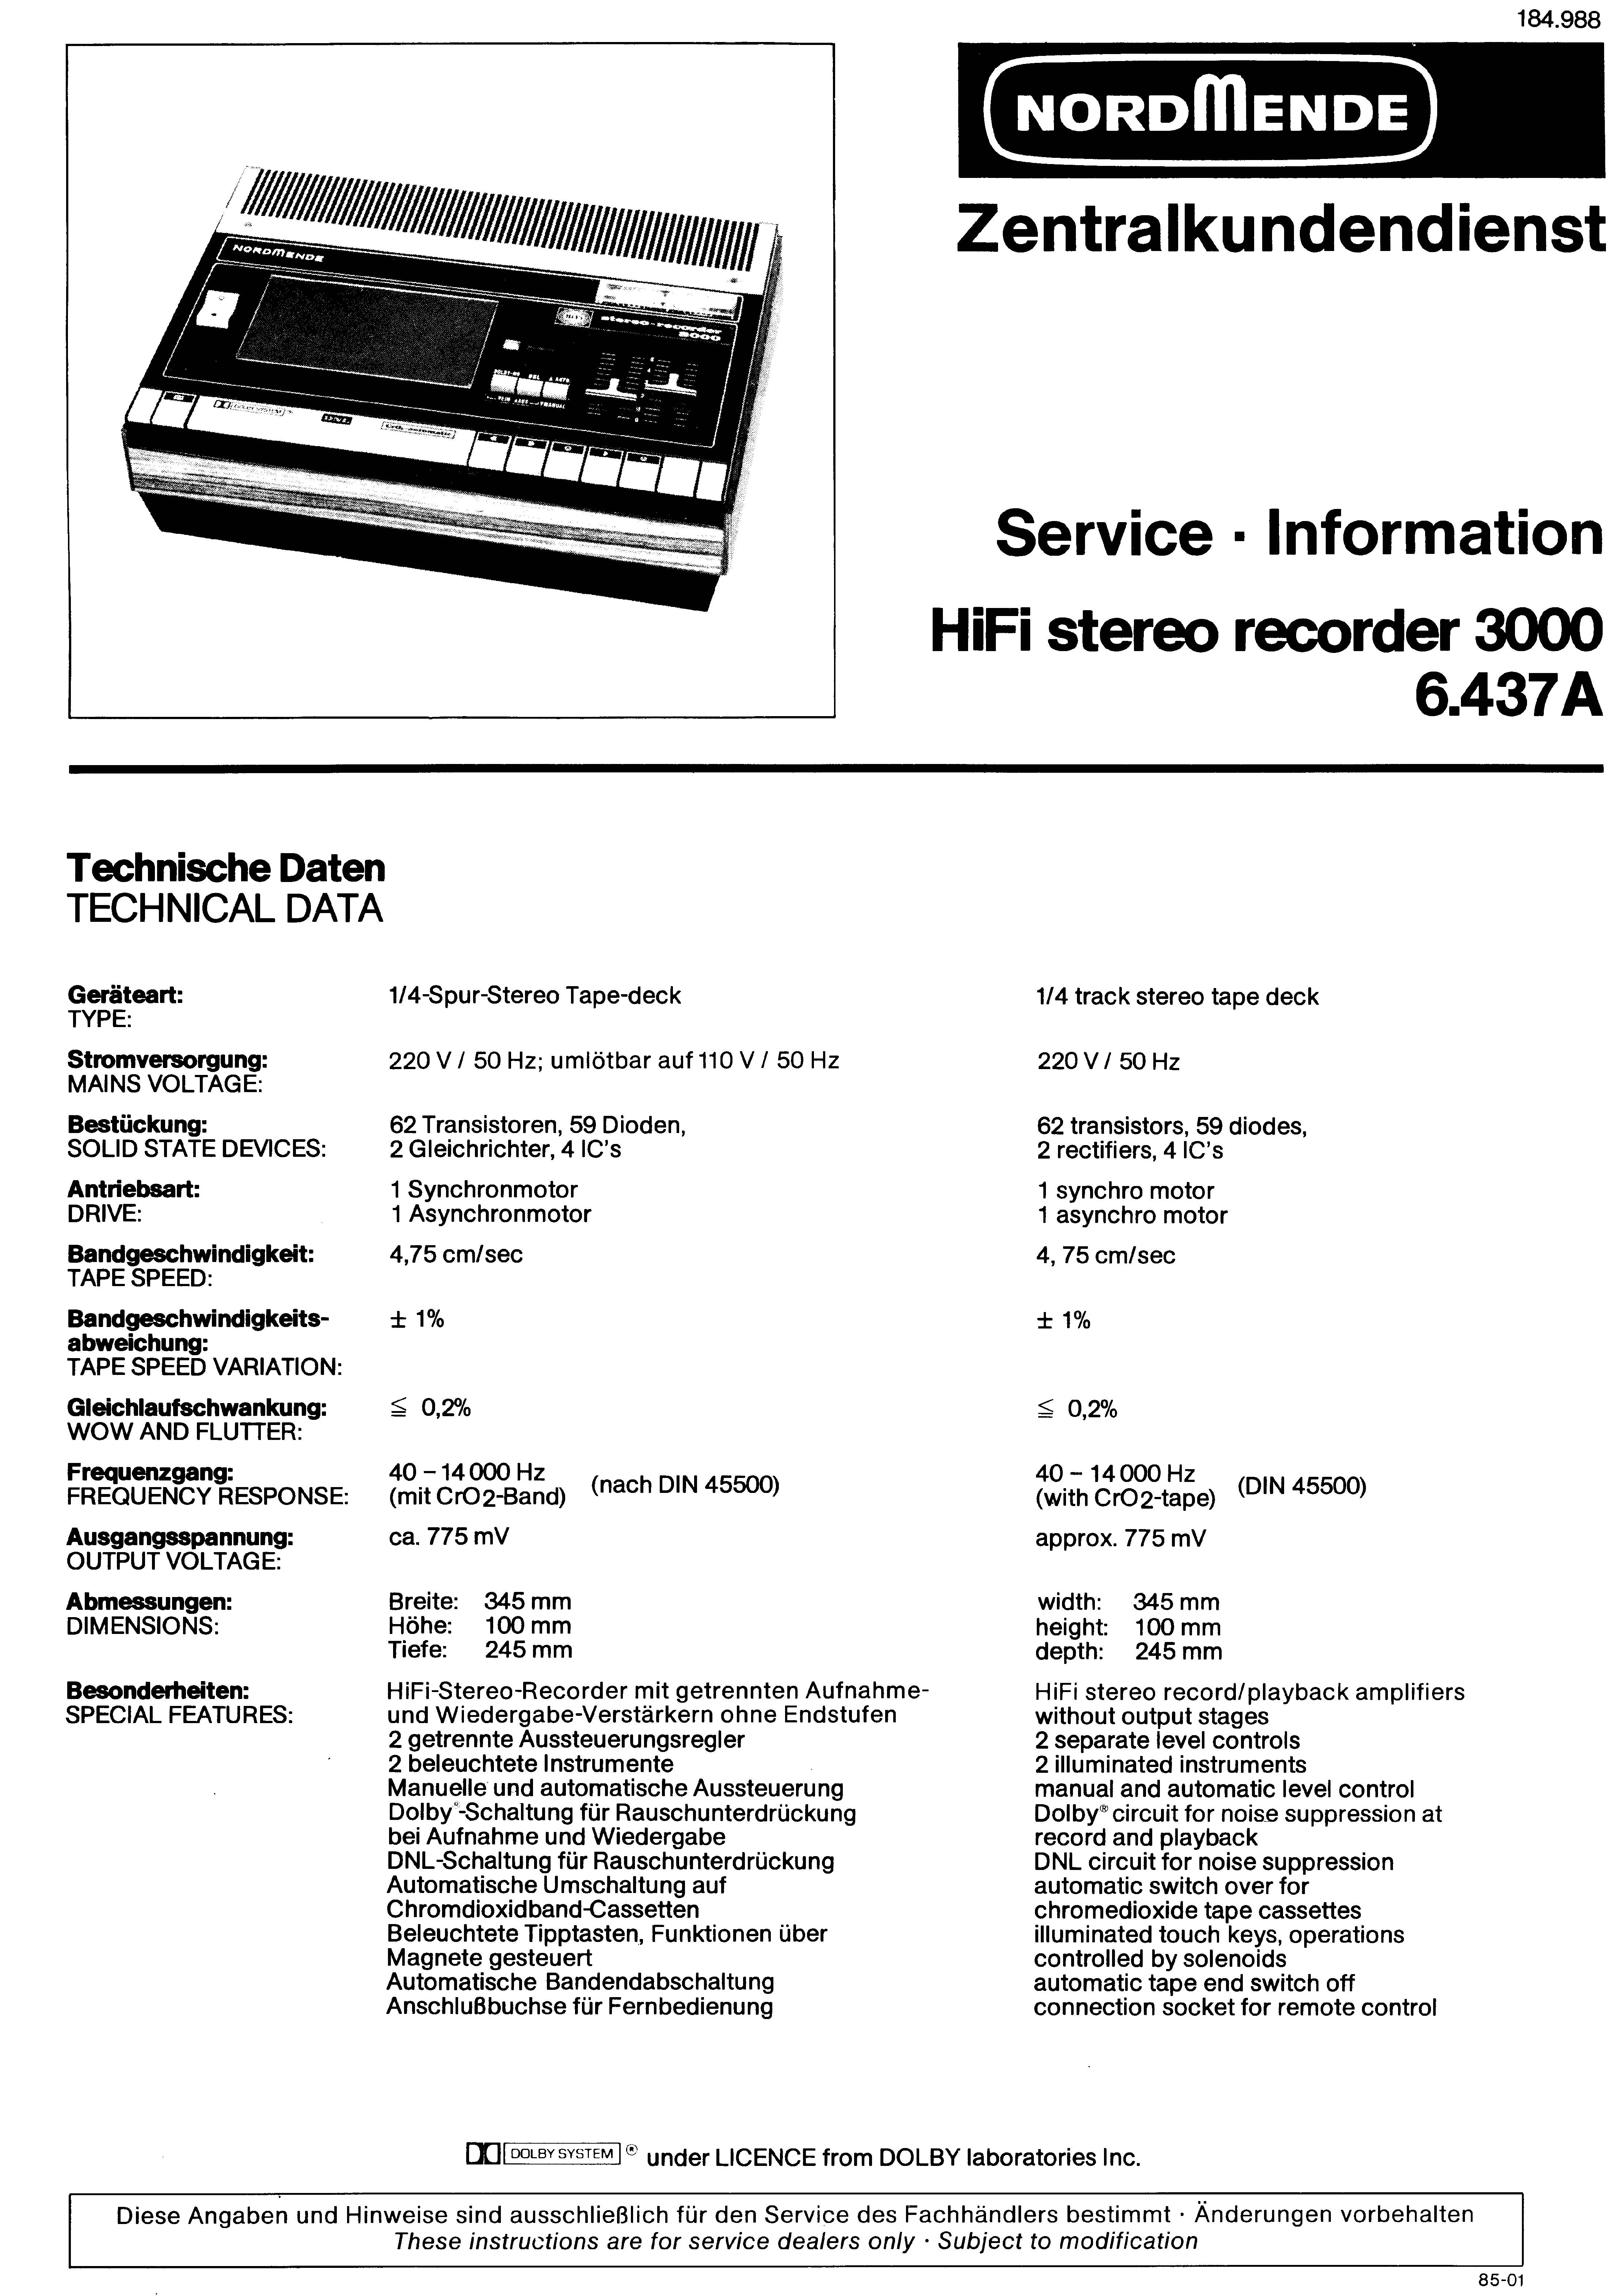 Nordmende Stereo Recorder 3000 6.437A